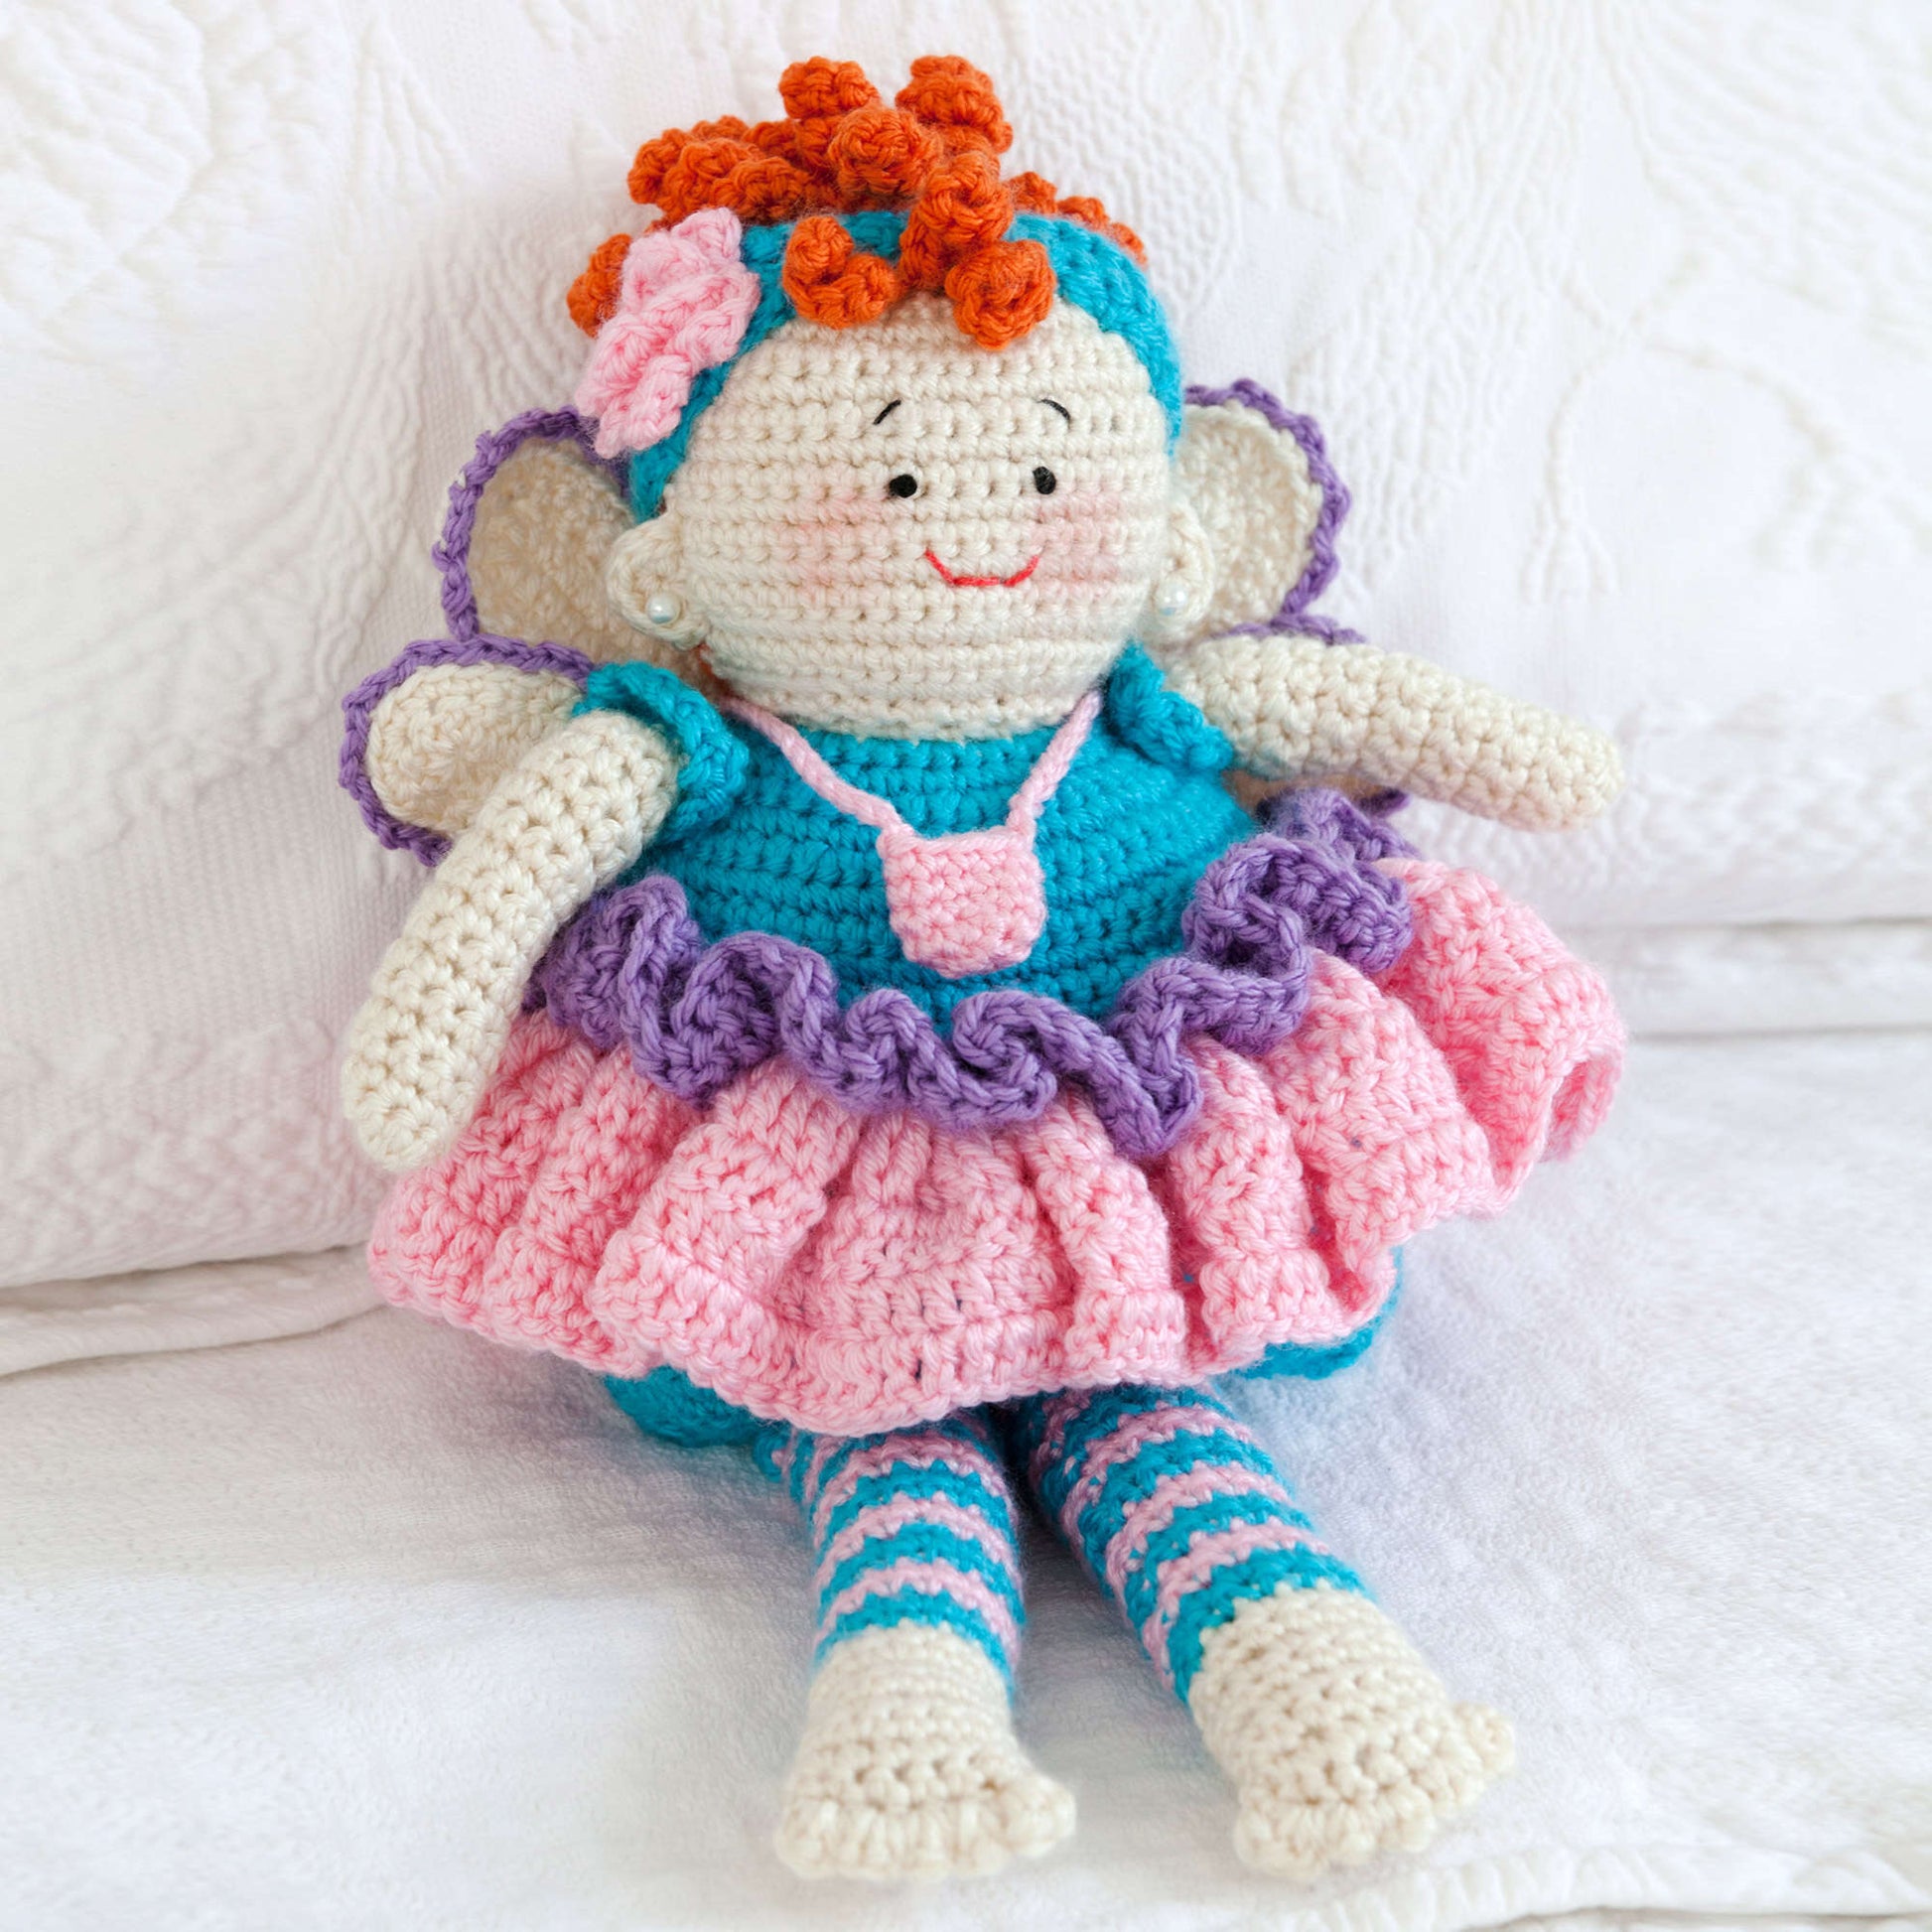 Free Red Heart Tooth Fairy Doll Crochet Pattern